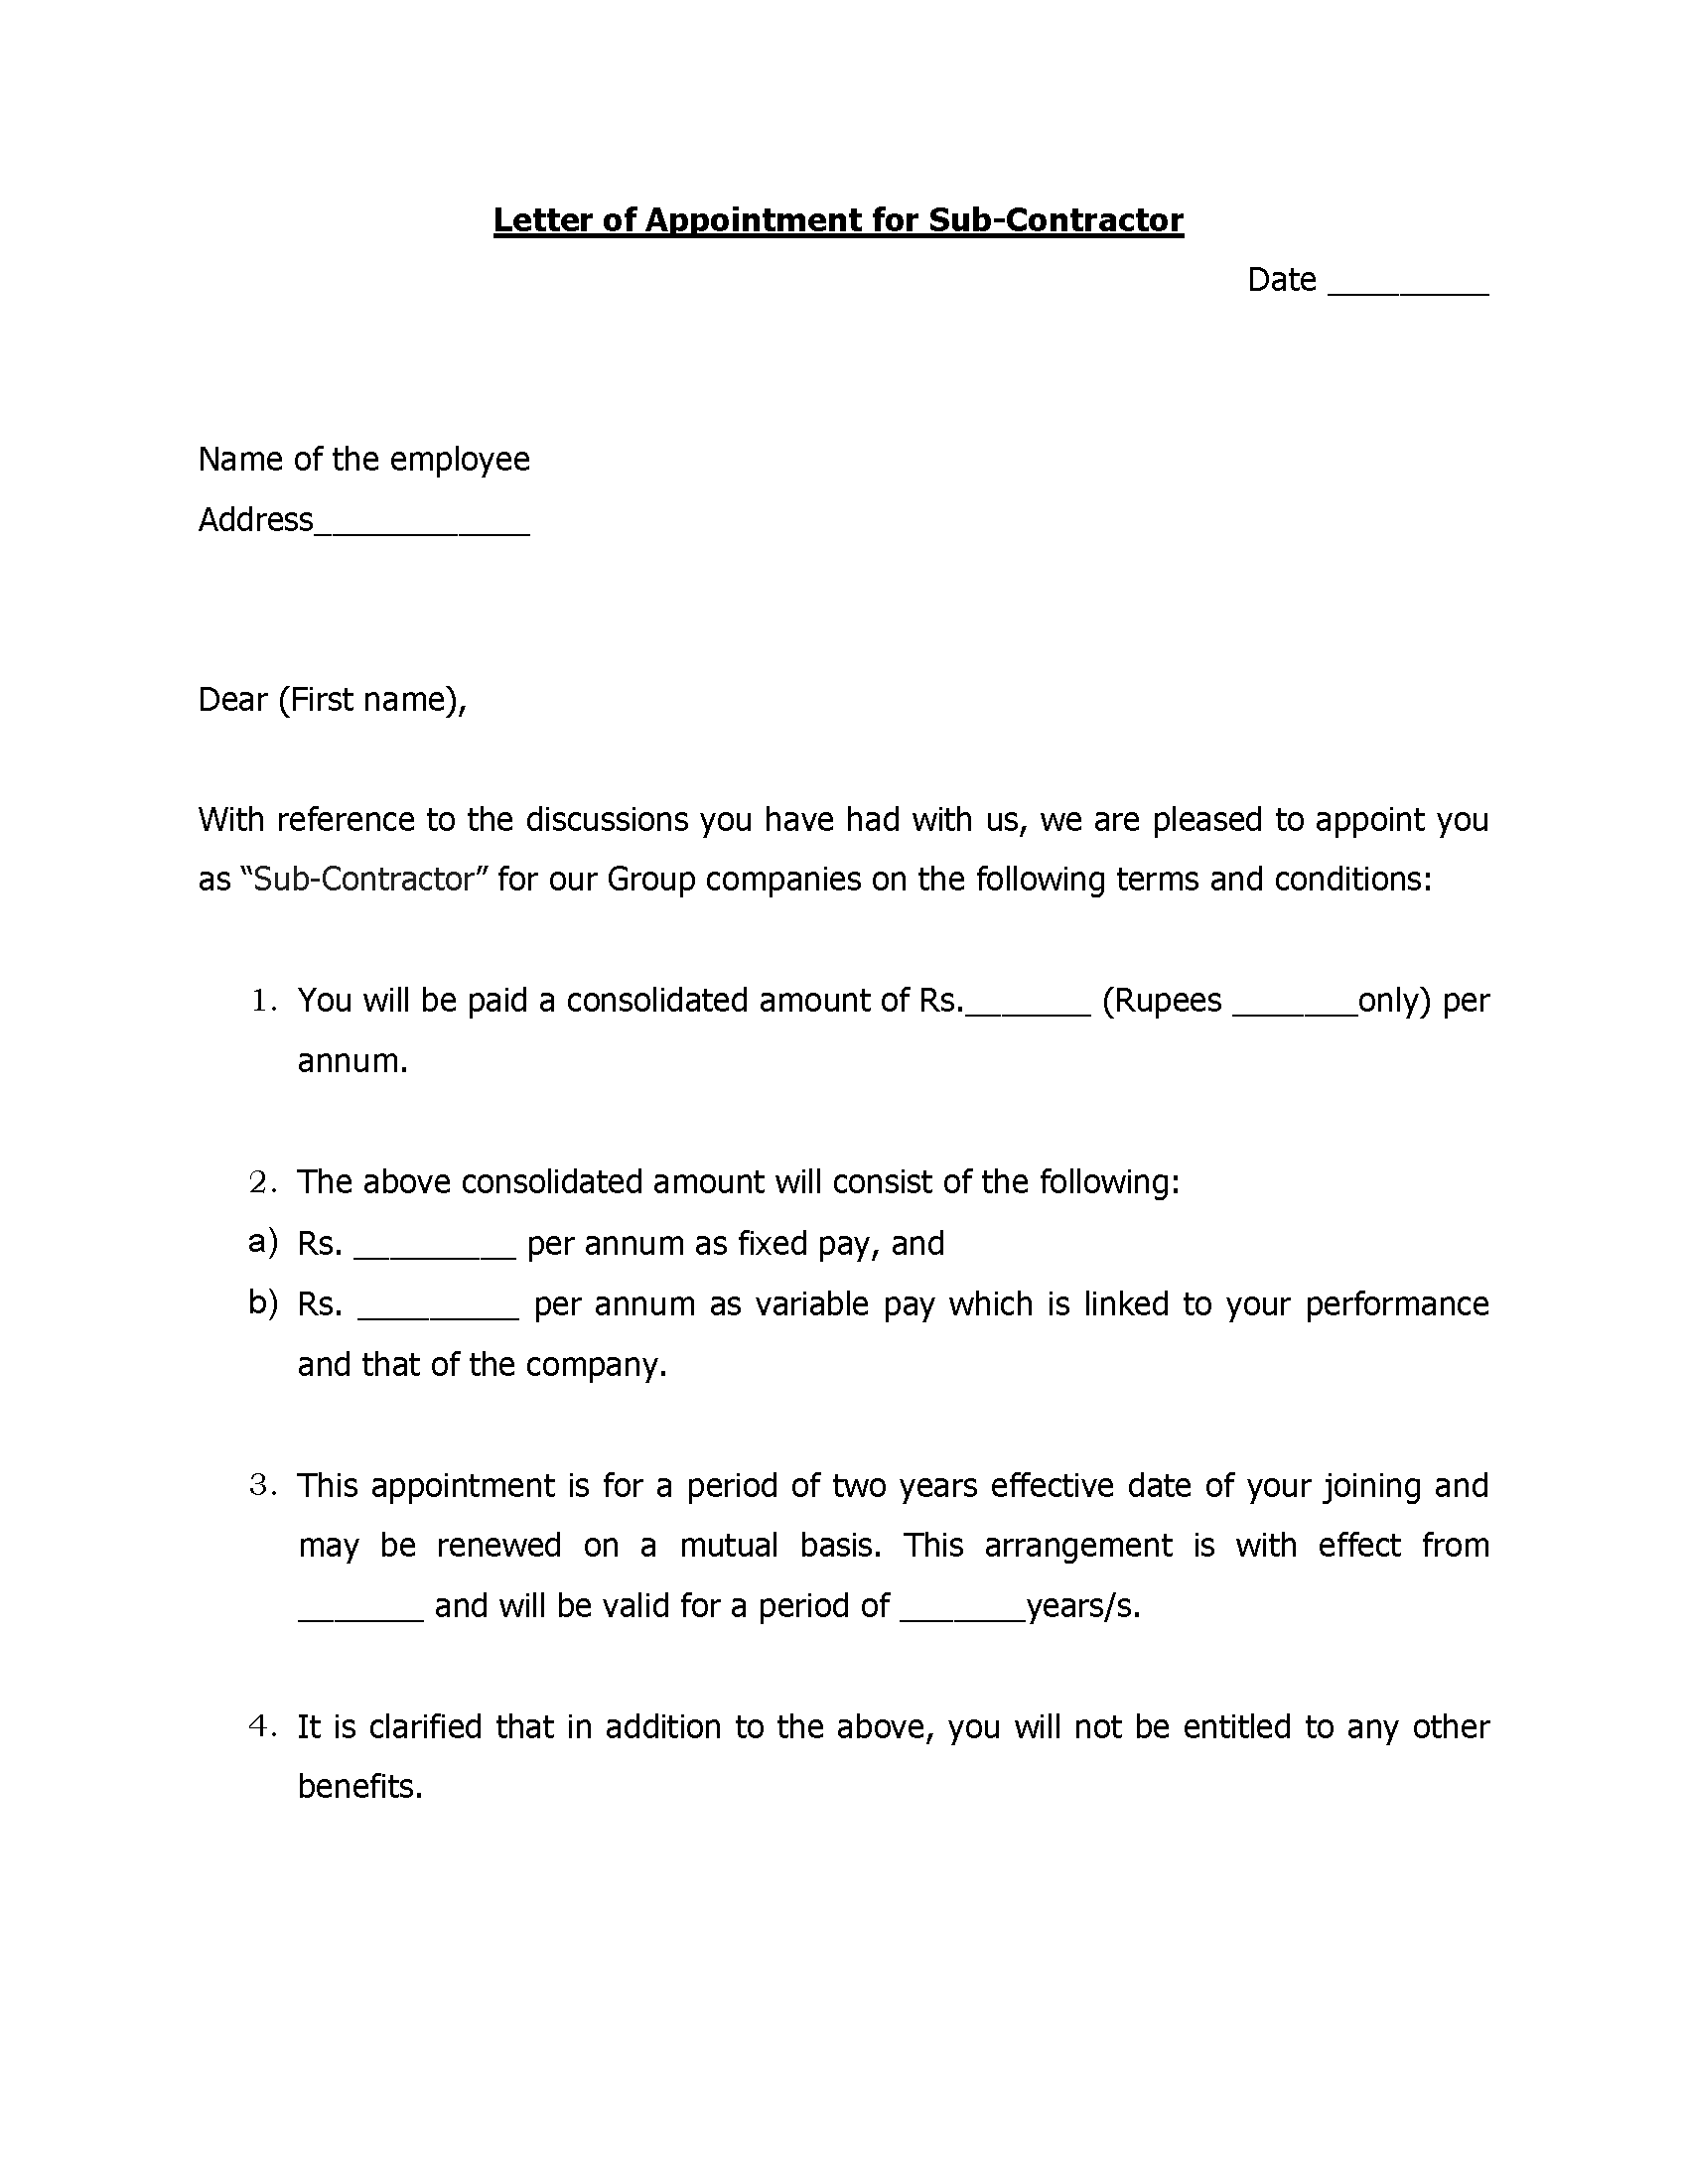 Letter Of Appointment For Sub-Contractor